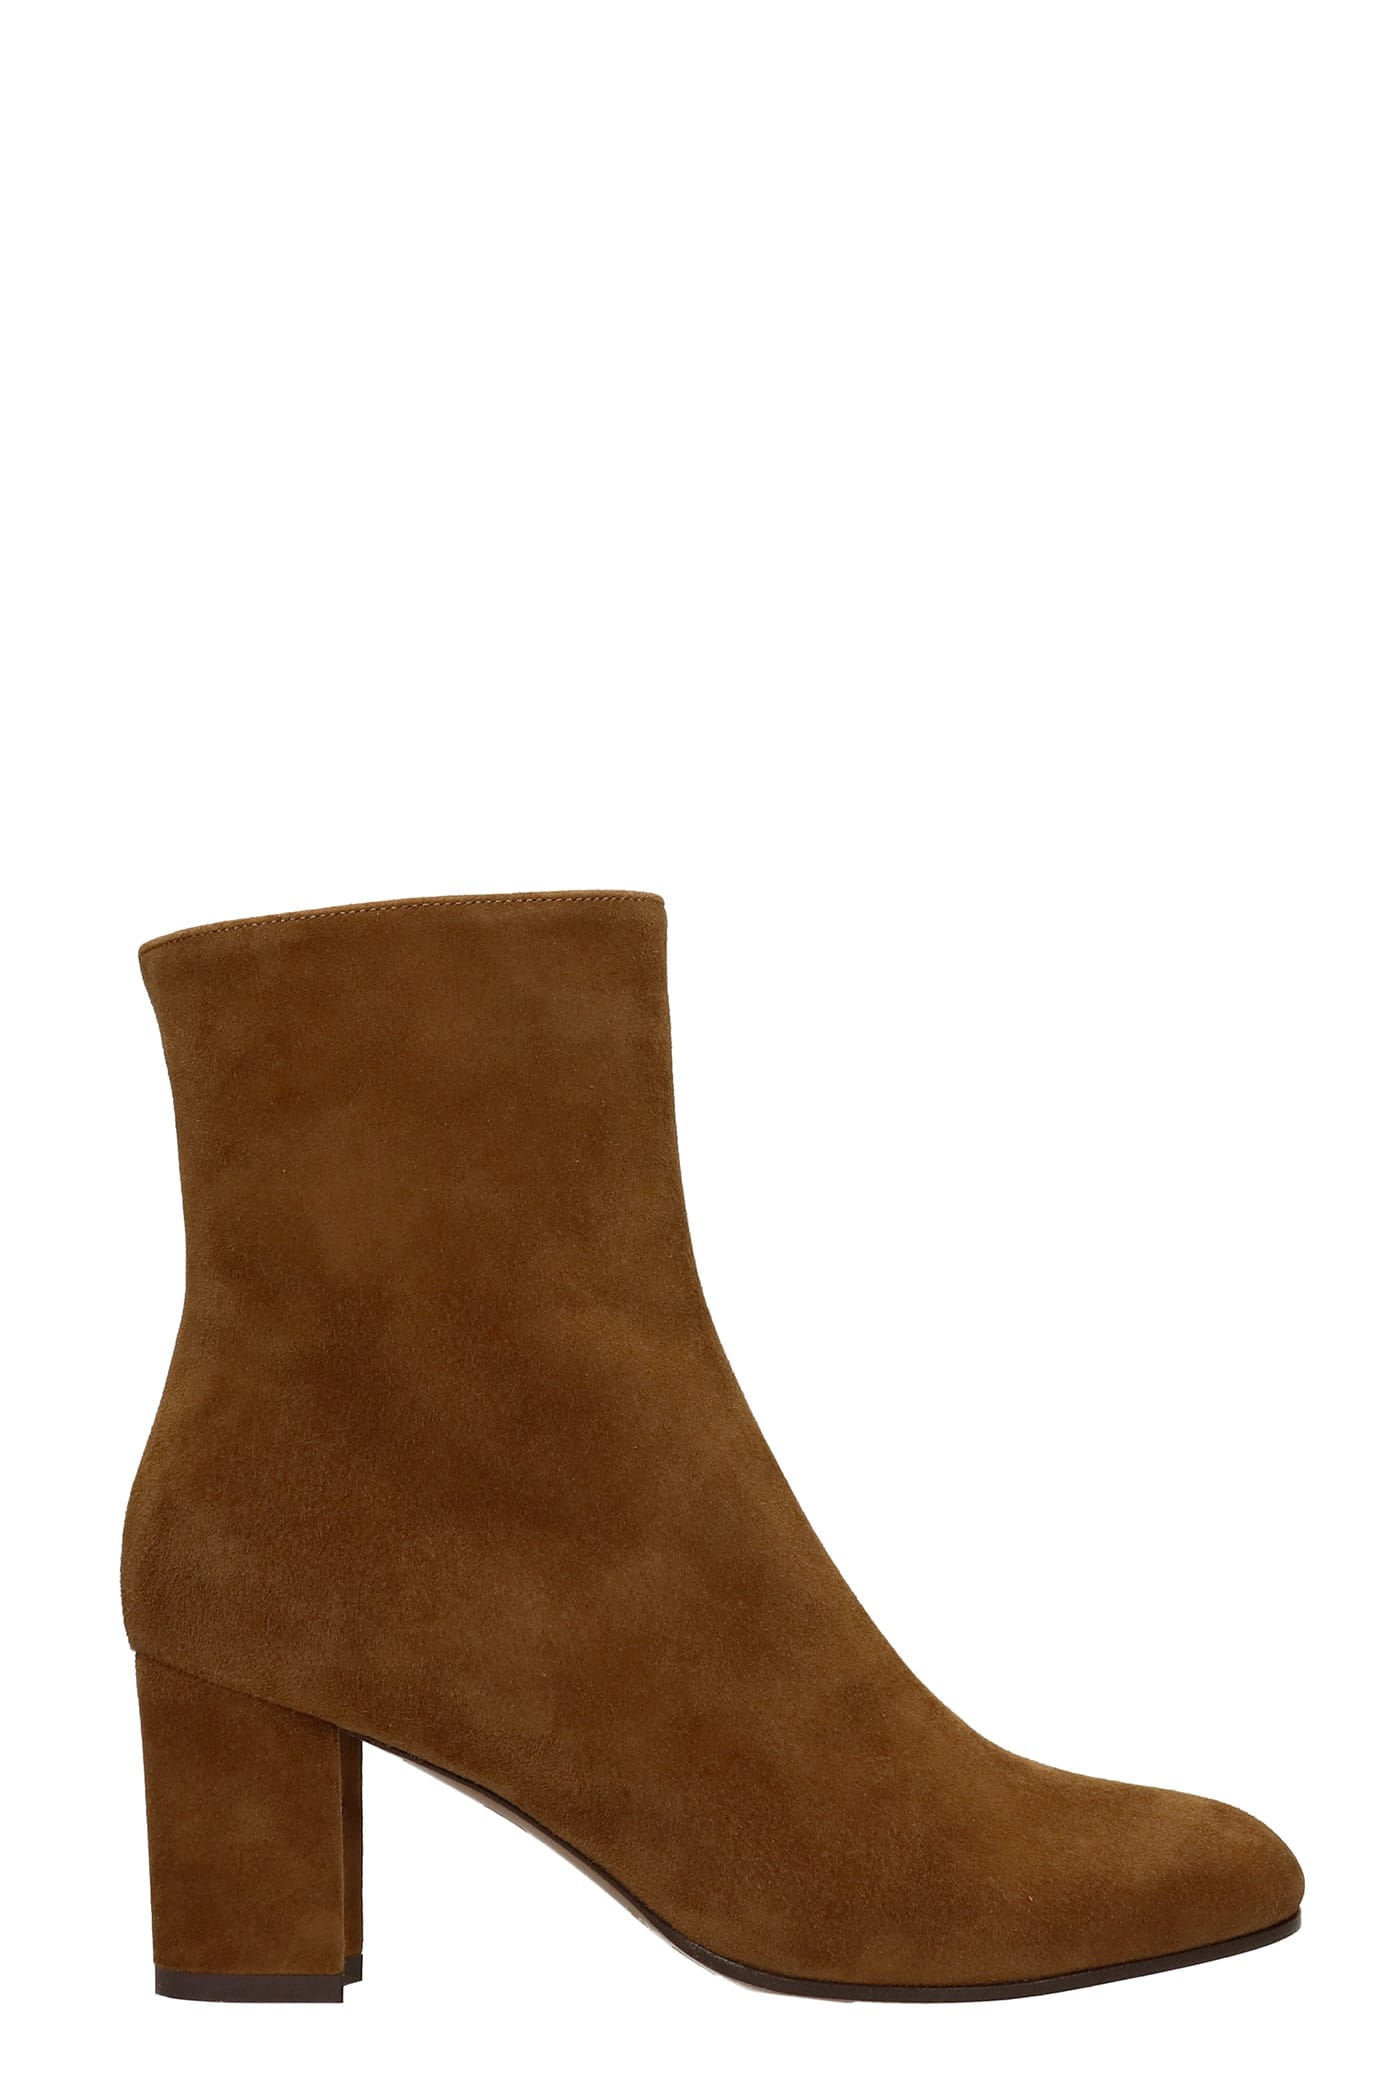 LAutre Chose High Heels Ankle Boots In Brown Suede